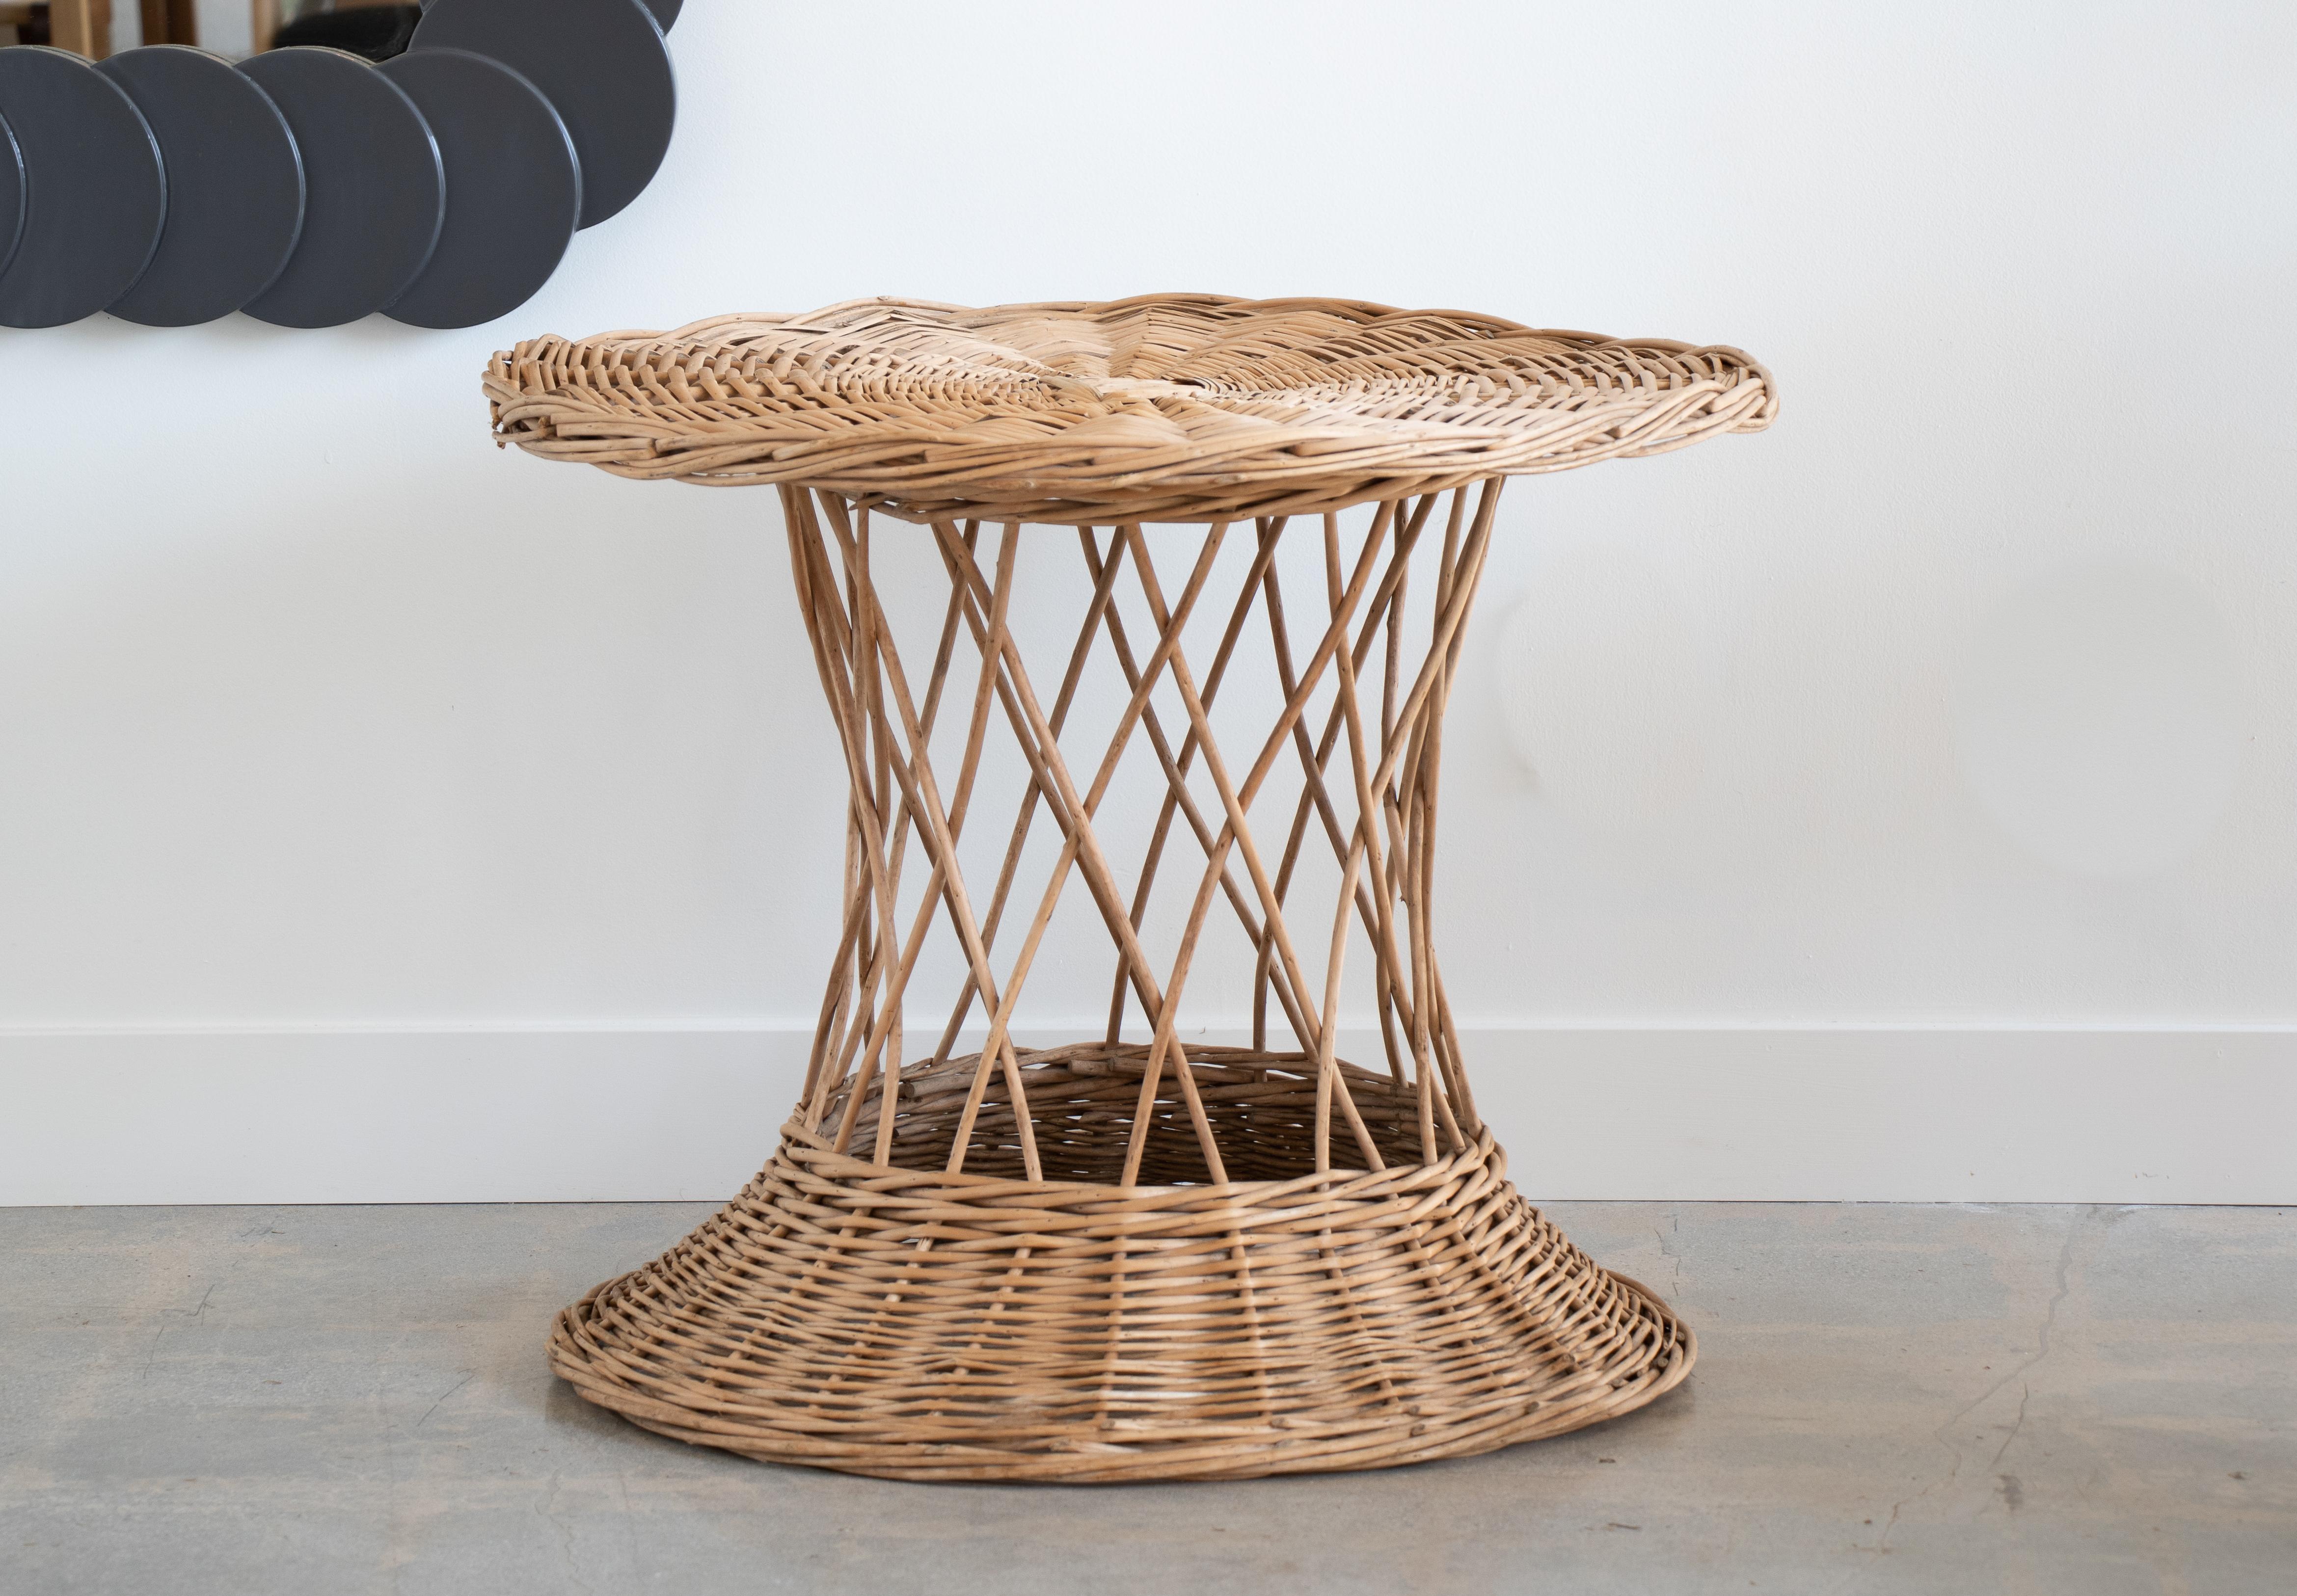 Vintage large wicker diabolo shaped table from France. Nice original condition with beautiful braided wicker detail. Signs of patina and age.